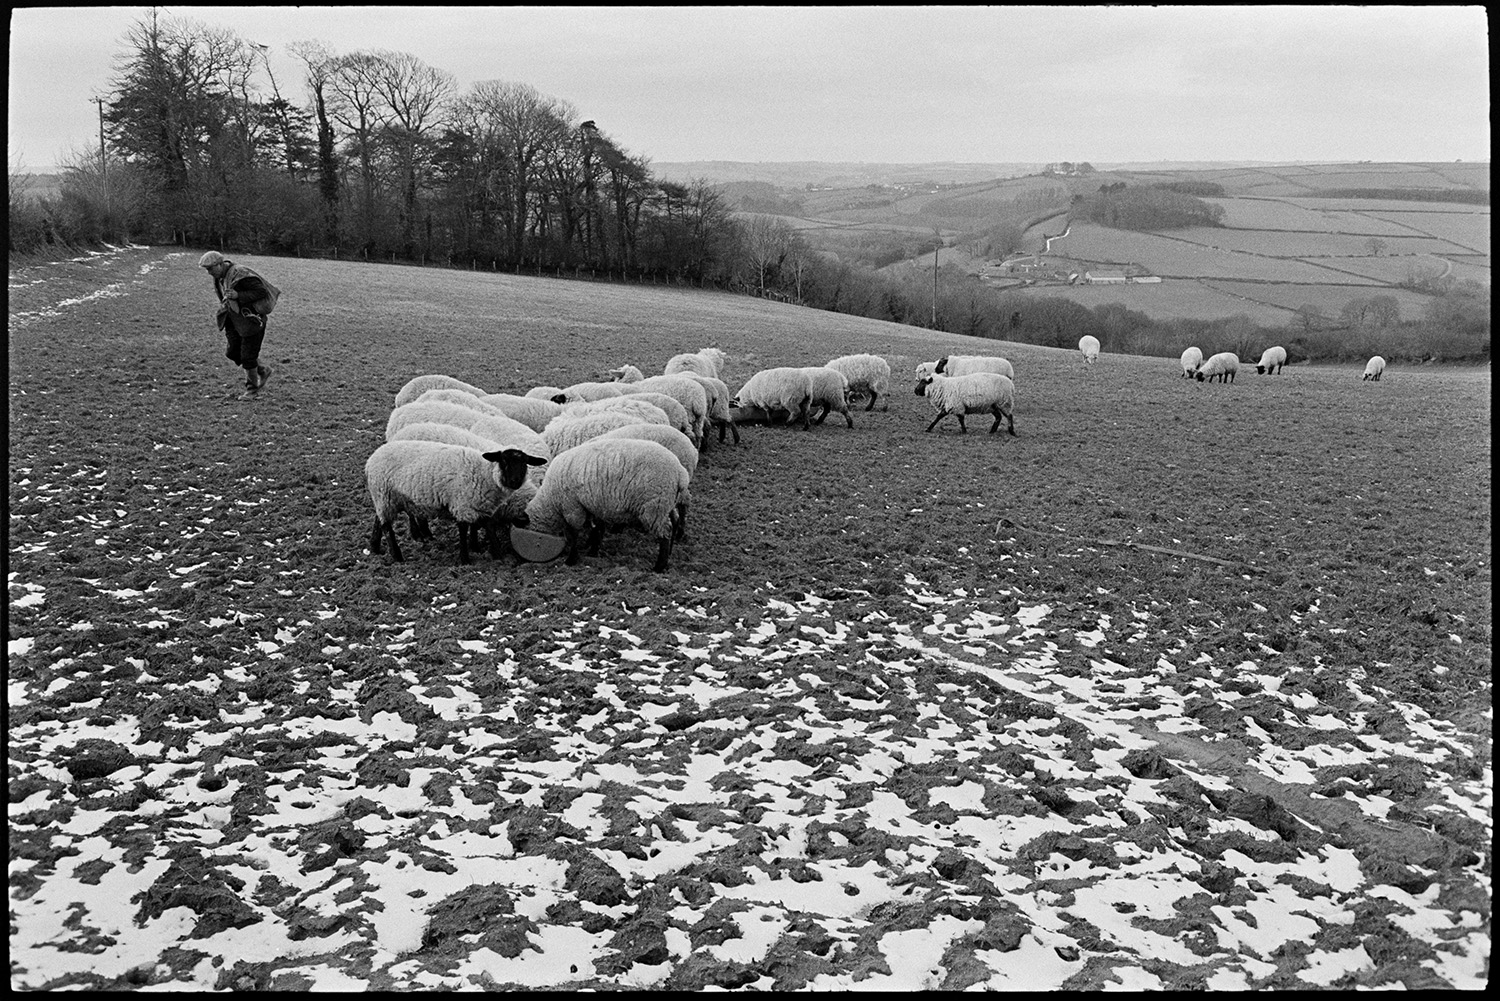 Snow, farmer feeding sheep, trough. 
[Sheep feeding from troughs in a field at Ashwell, Dolton. George Ayre is walking away from the sheep after filling their troughs with feed. Patches of snow can be seen in the field in the foreground.]